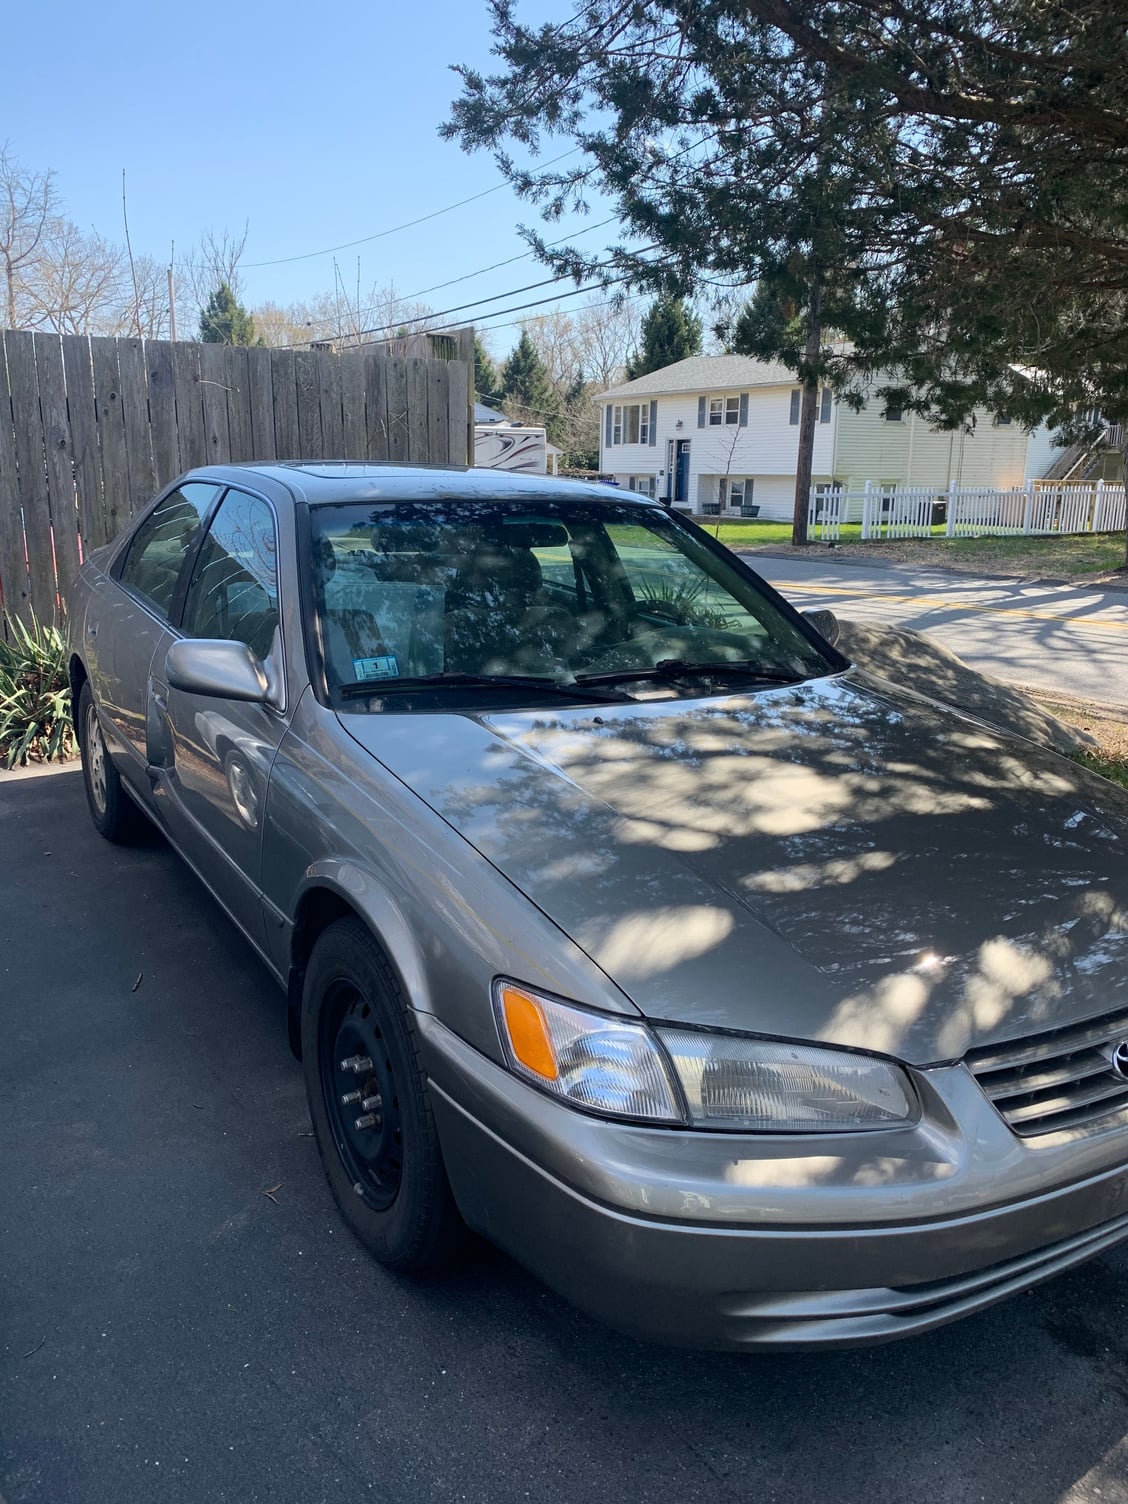 1999 Camry LE V6 - Camry Forums - Toyota Camry Forum